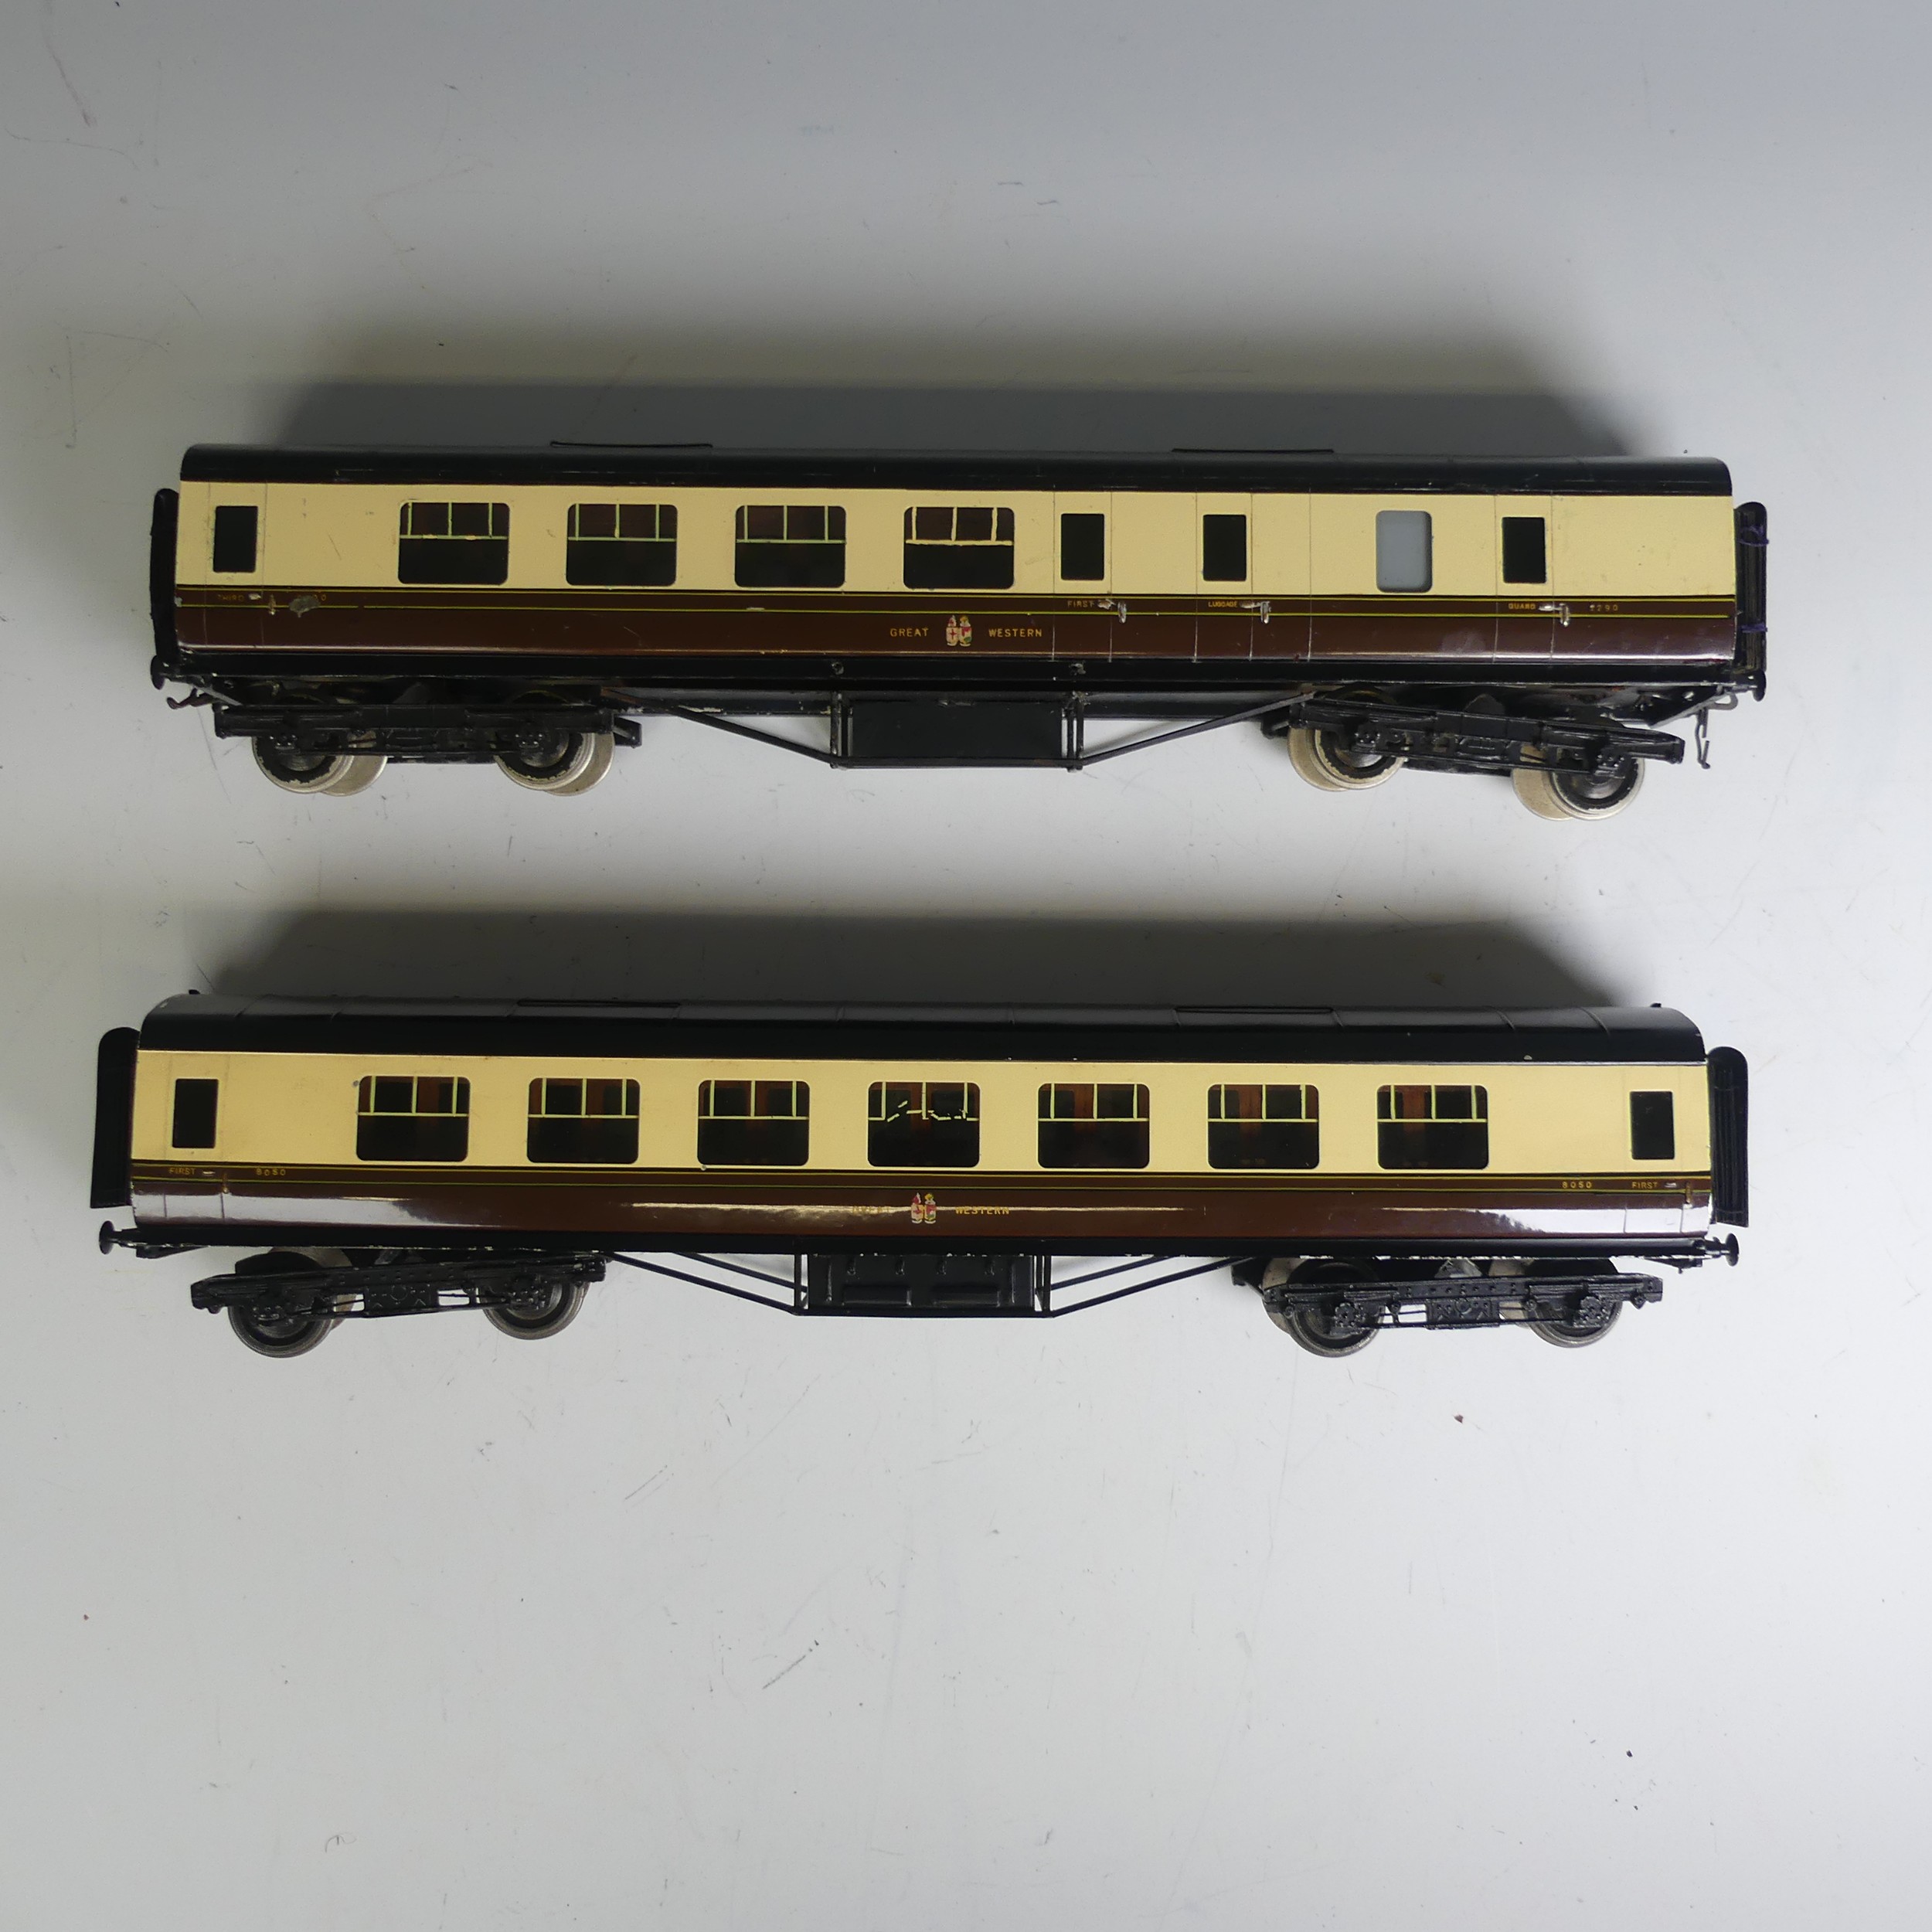 Two Exley ‘0’ gauge GWR Coaches, chocolate and cream: All 1st Class Corridor Passenger Coach No. - Image 6 of 6